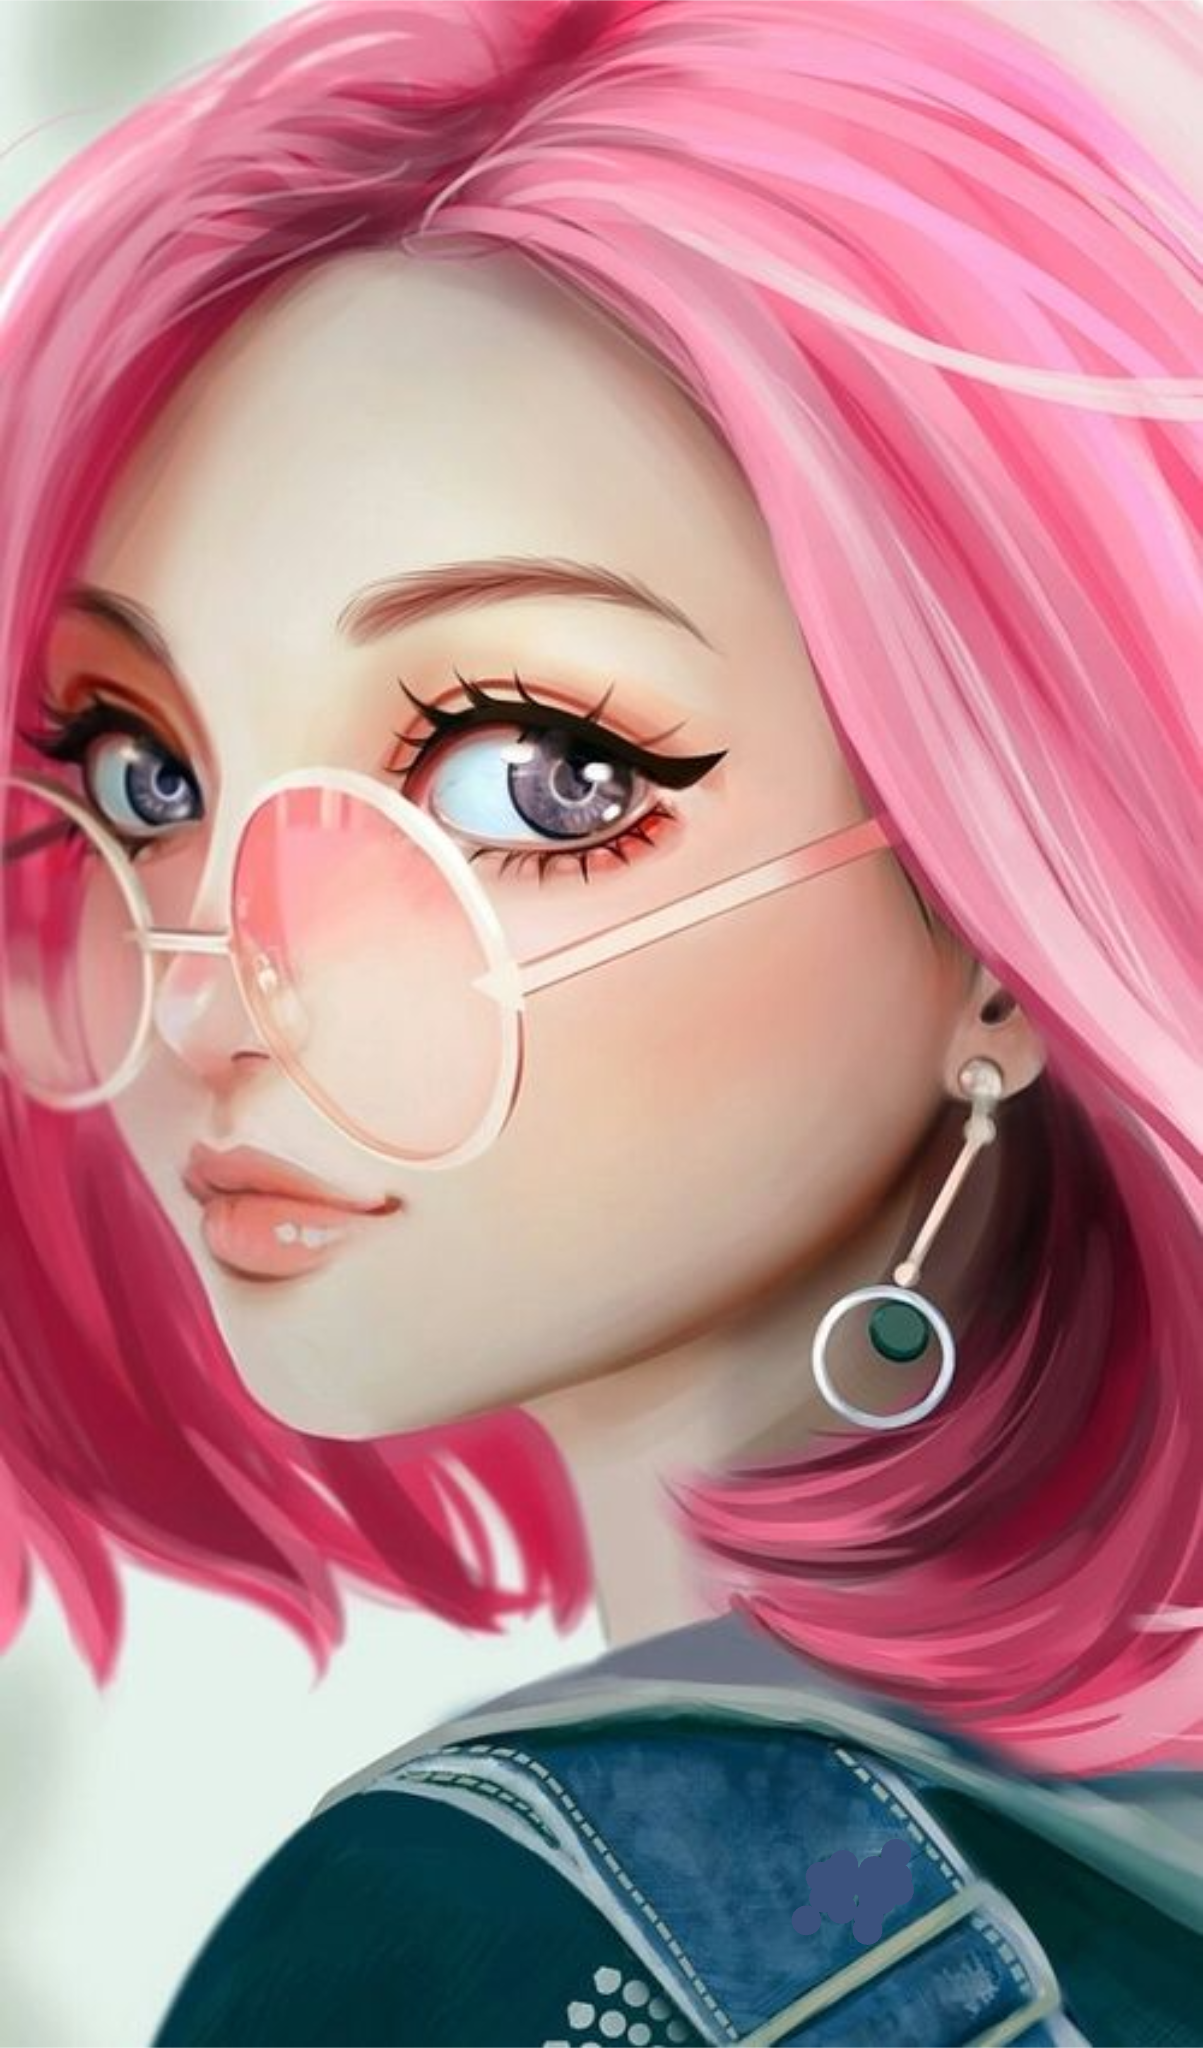 drawing of a girl with pink hair - Wallpaper Cave